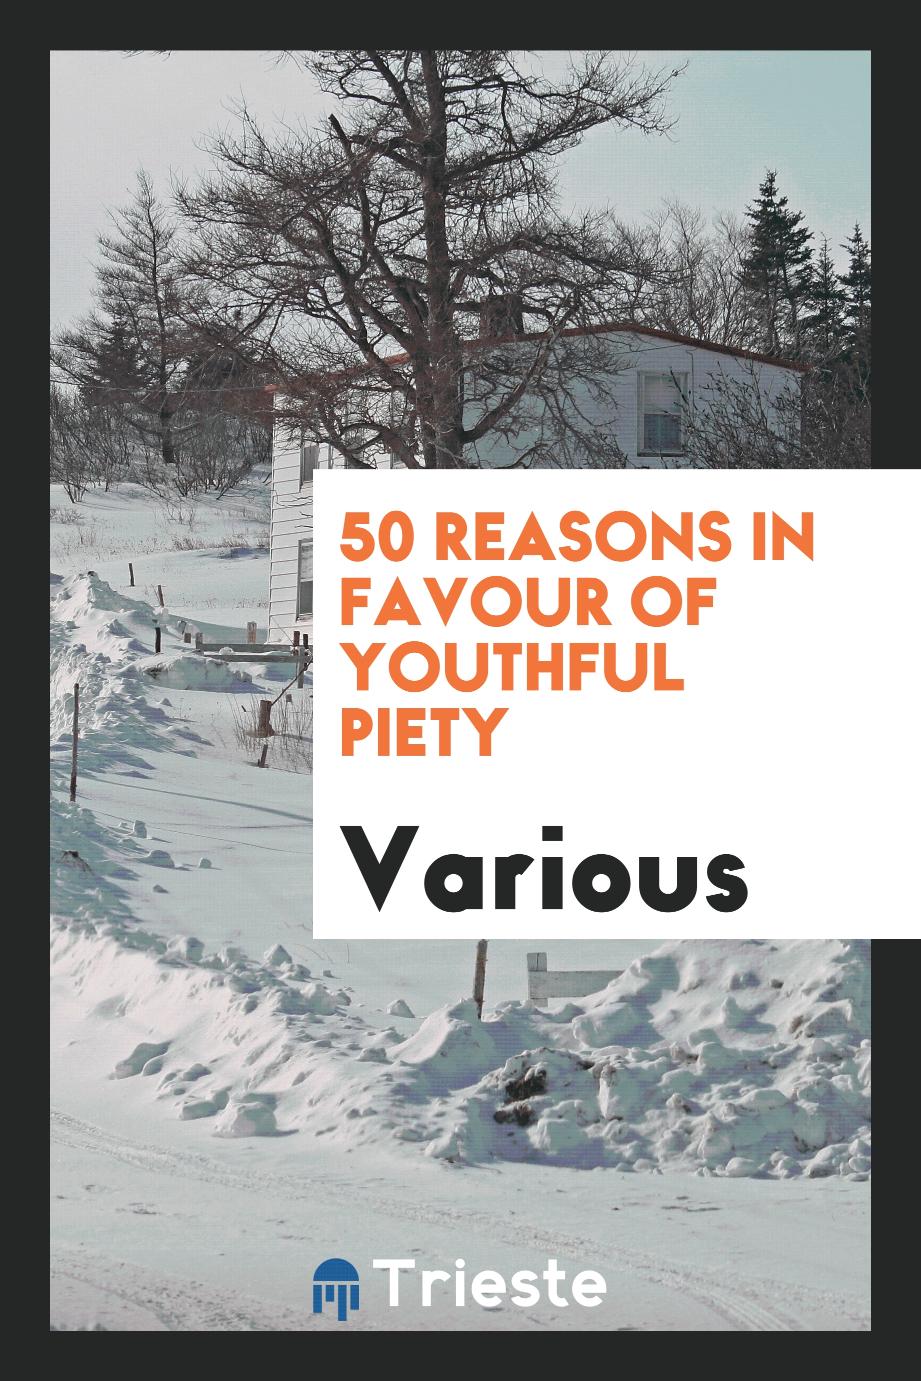 50 Reasons in Favour of Youthful Piety